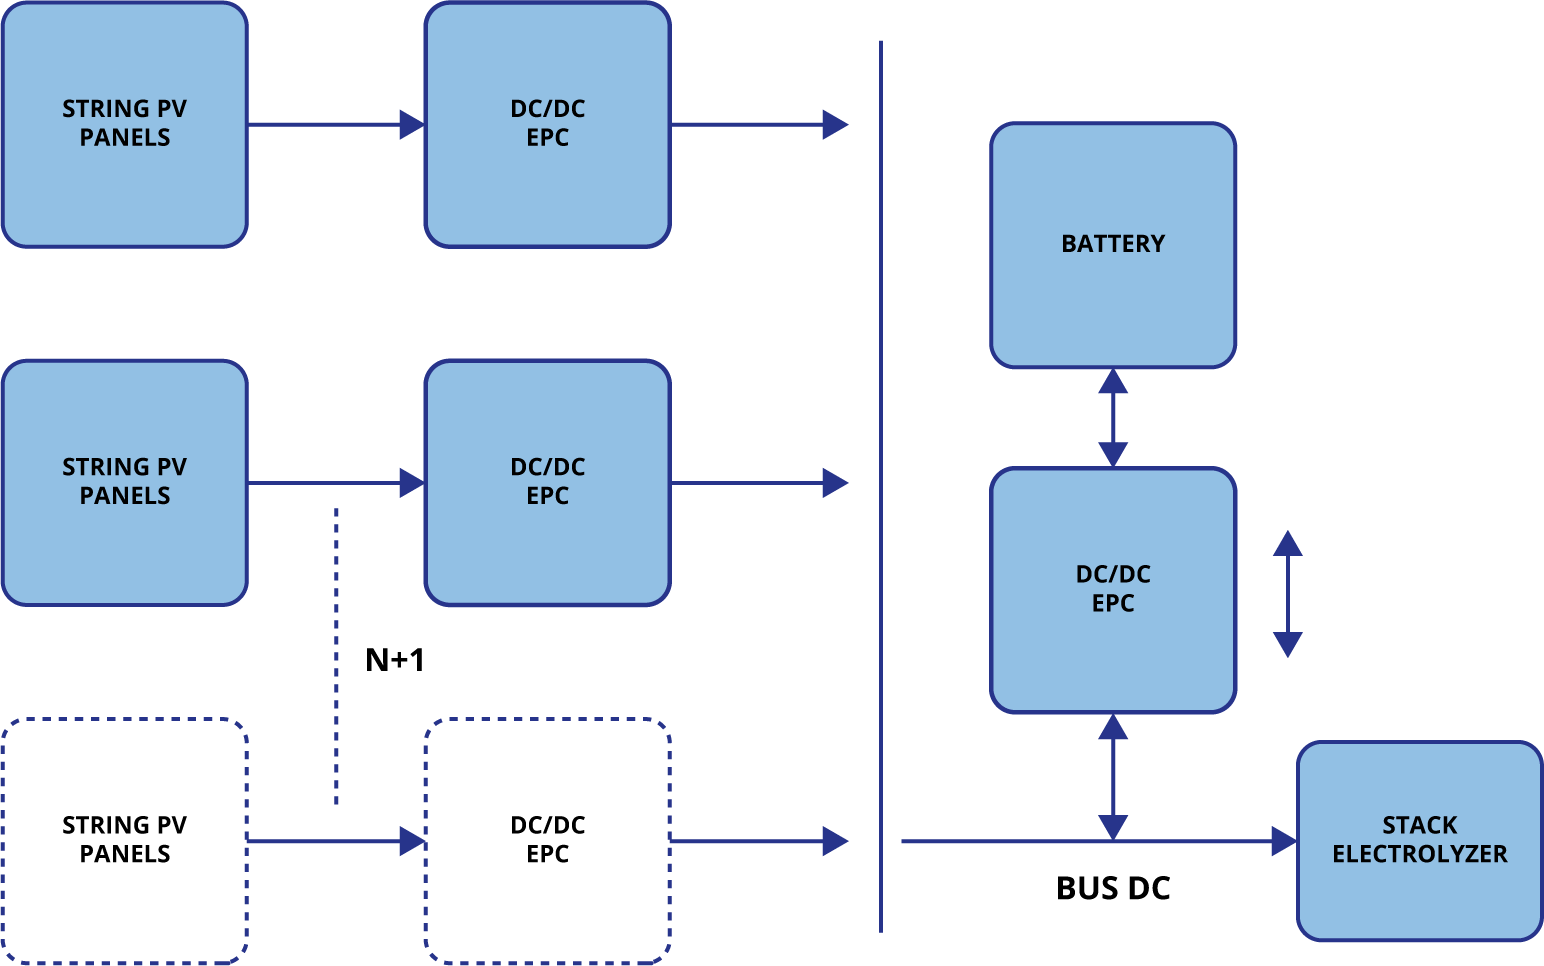 DC/DC converter per string and battery connected directly to electrolyzer stack.